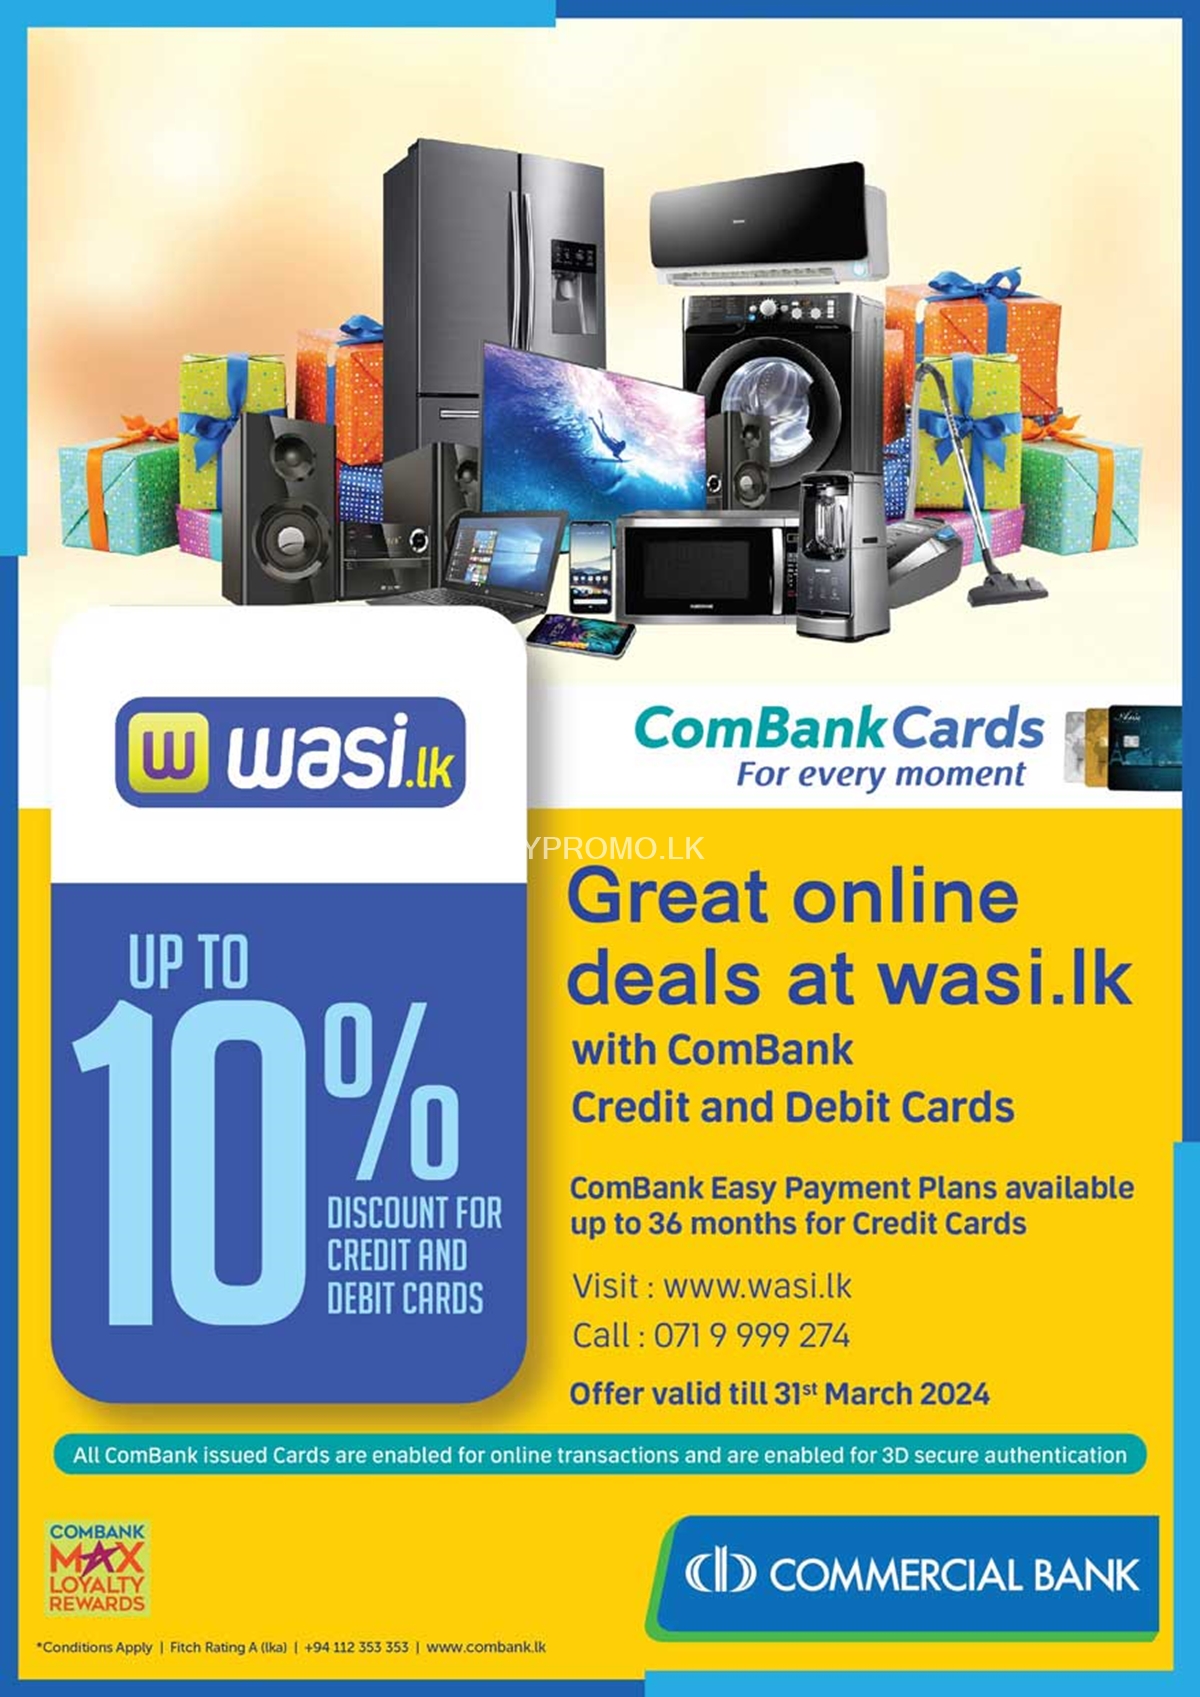 Great online deals at wasi.lk with ComBank Credit and Debit Cards